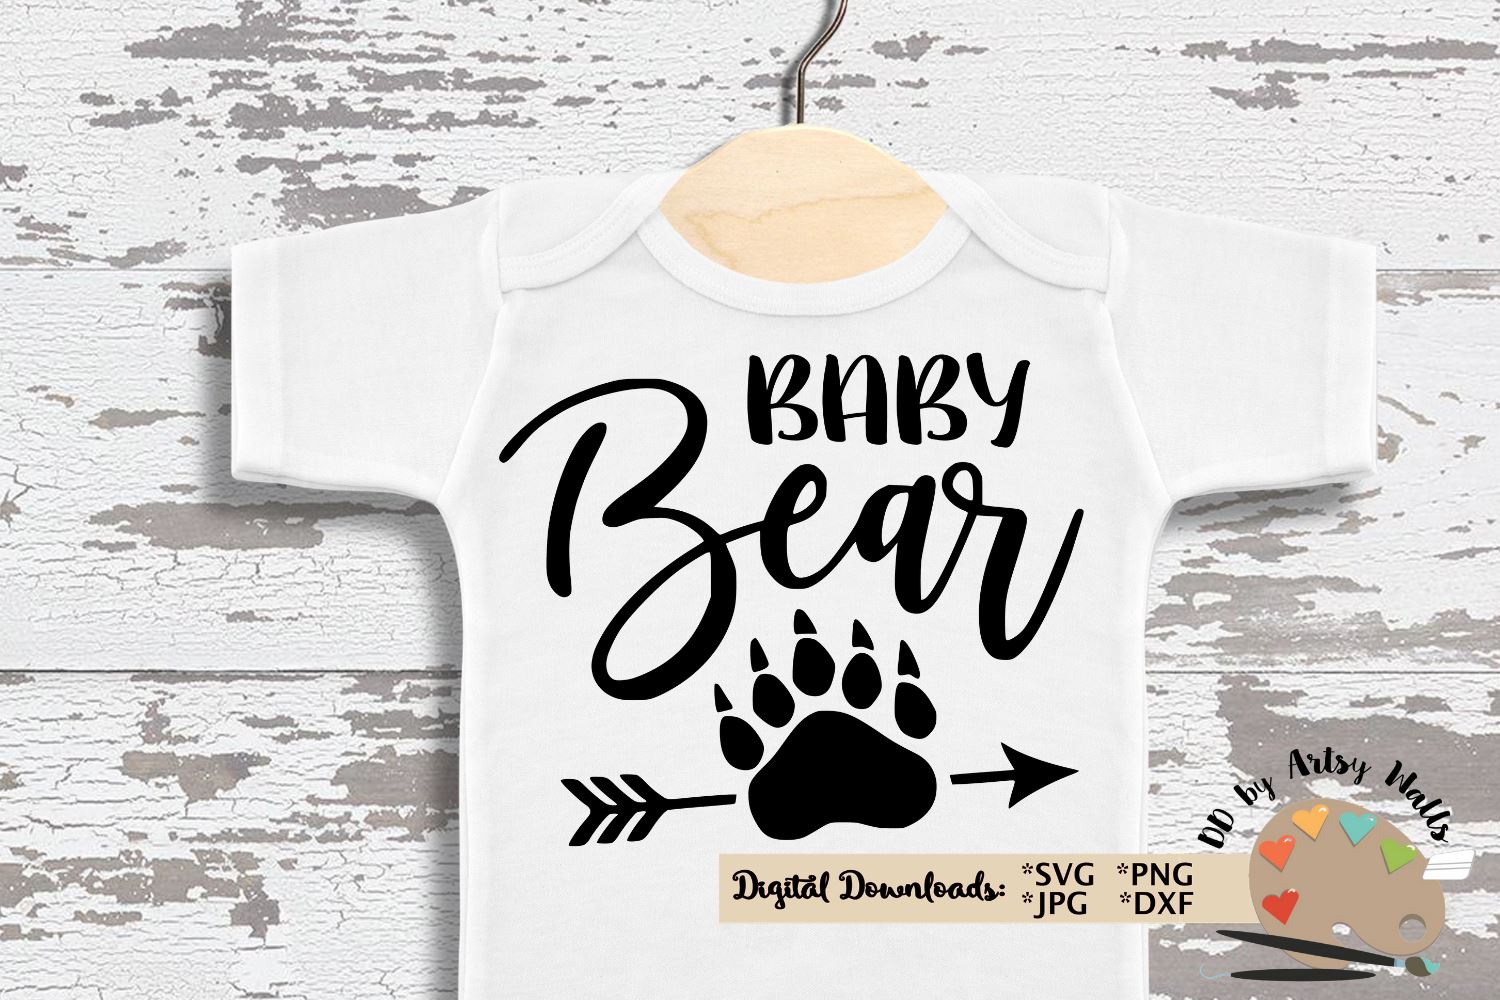 Download Baby Bear Svg Dxf New Baby Gift Baby Onesie Diy Baby Shower Gift So Fontsy